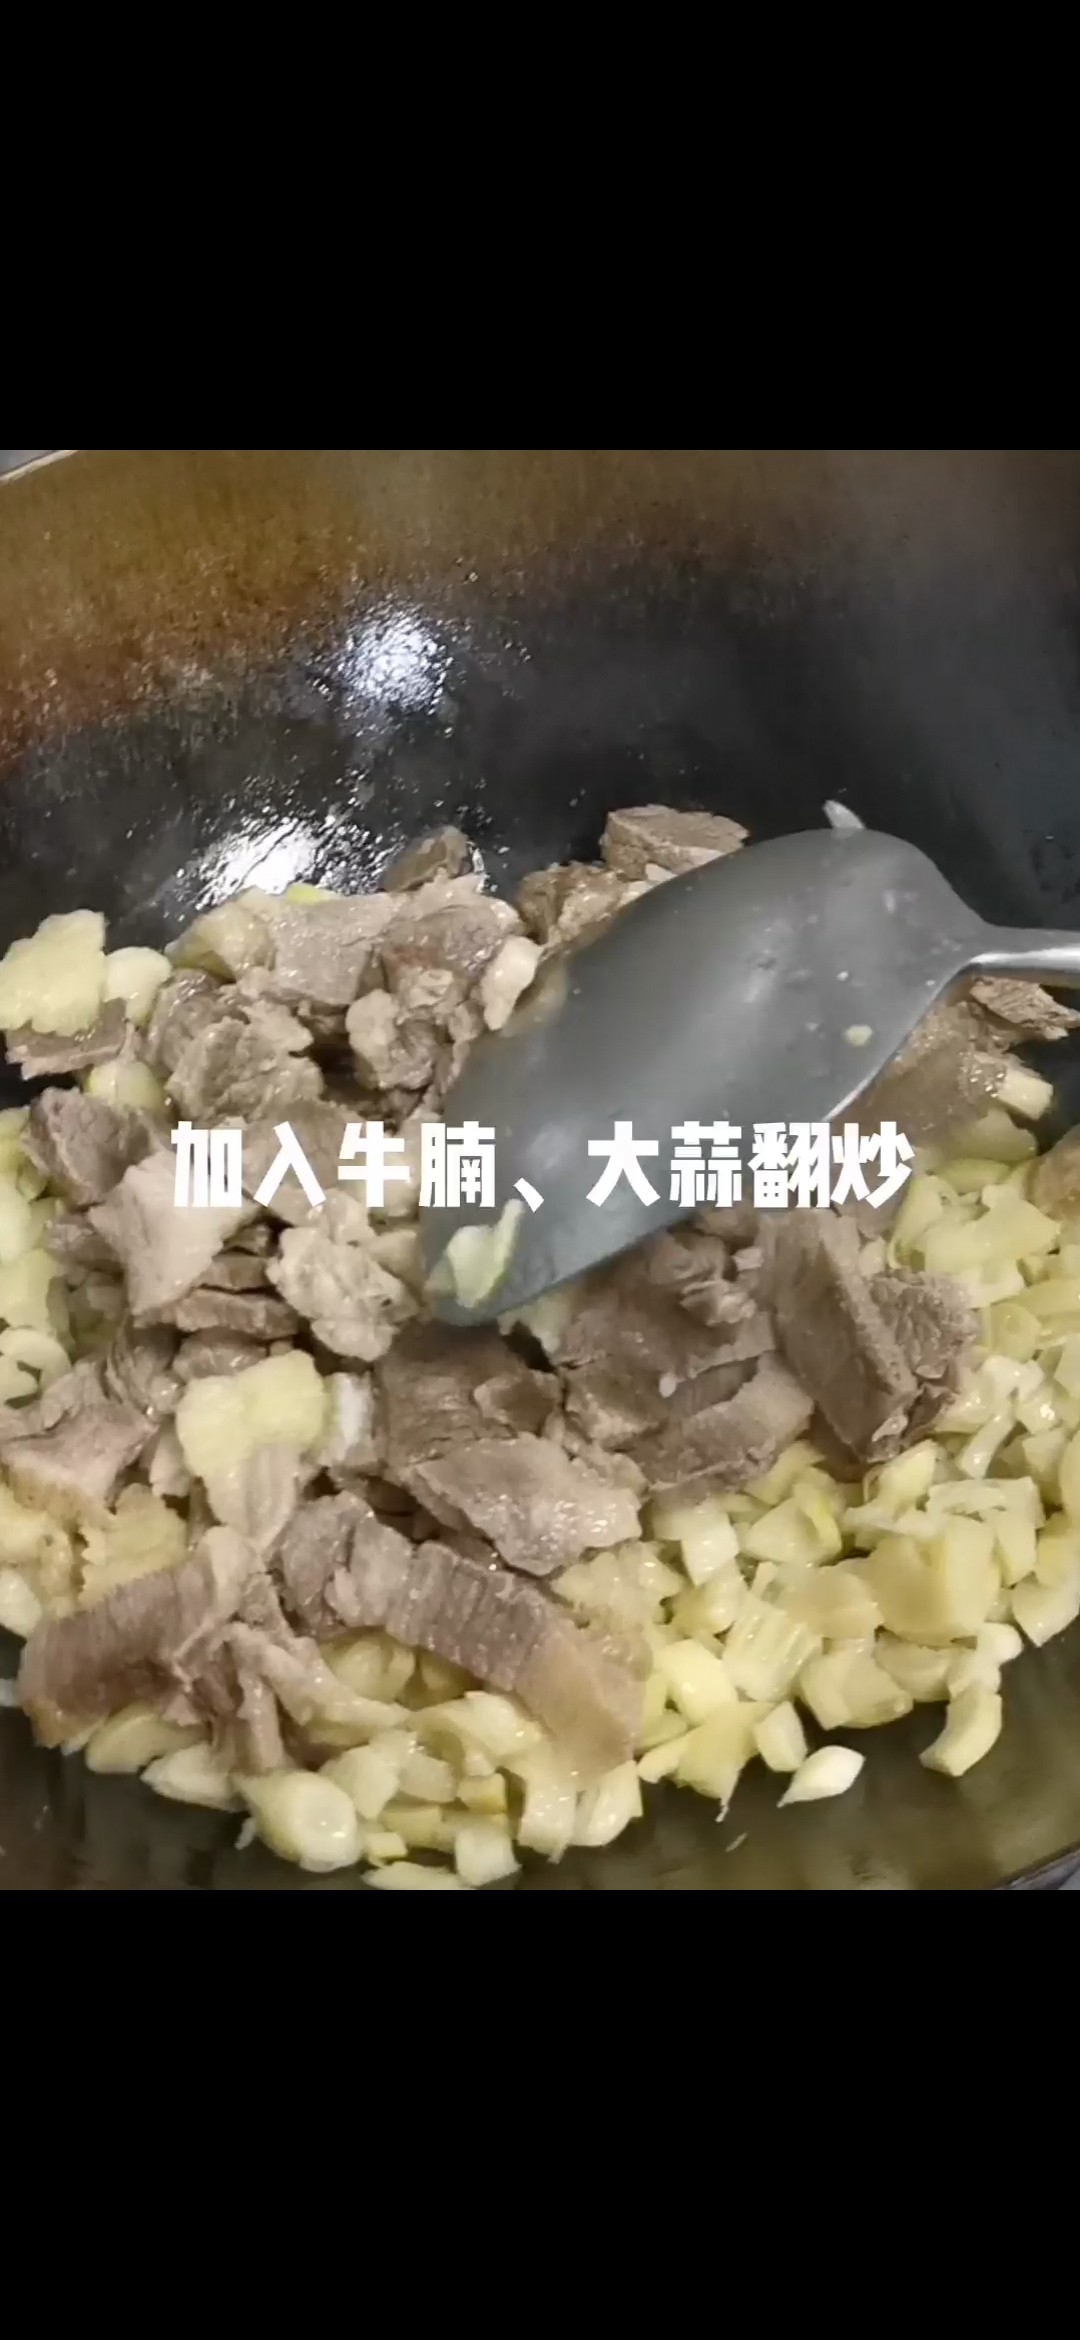 Stir-fried Beef Brisket with Spring Bamboo Shoots recipe